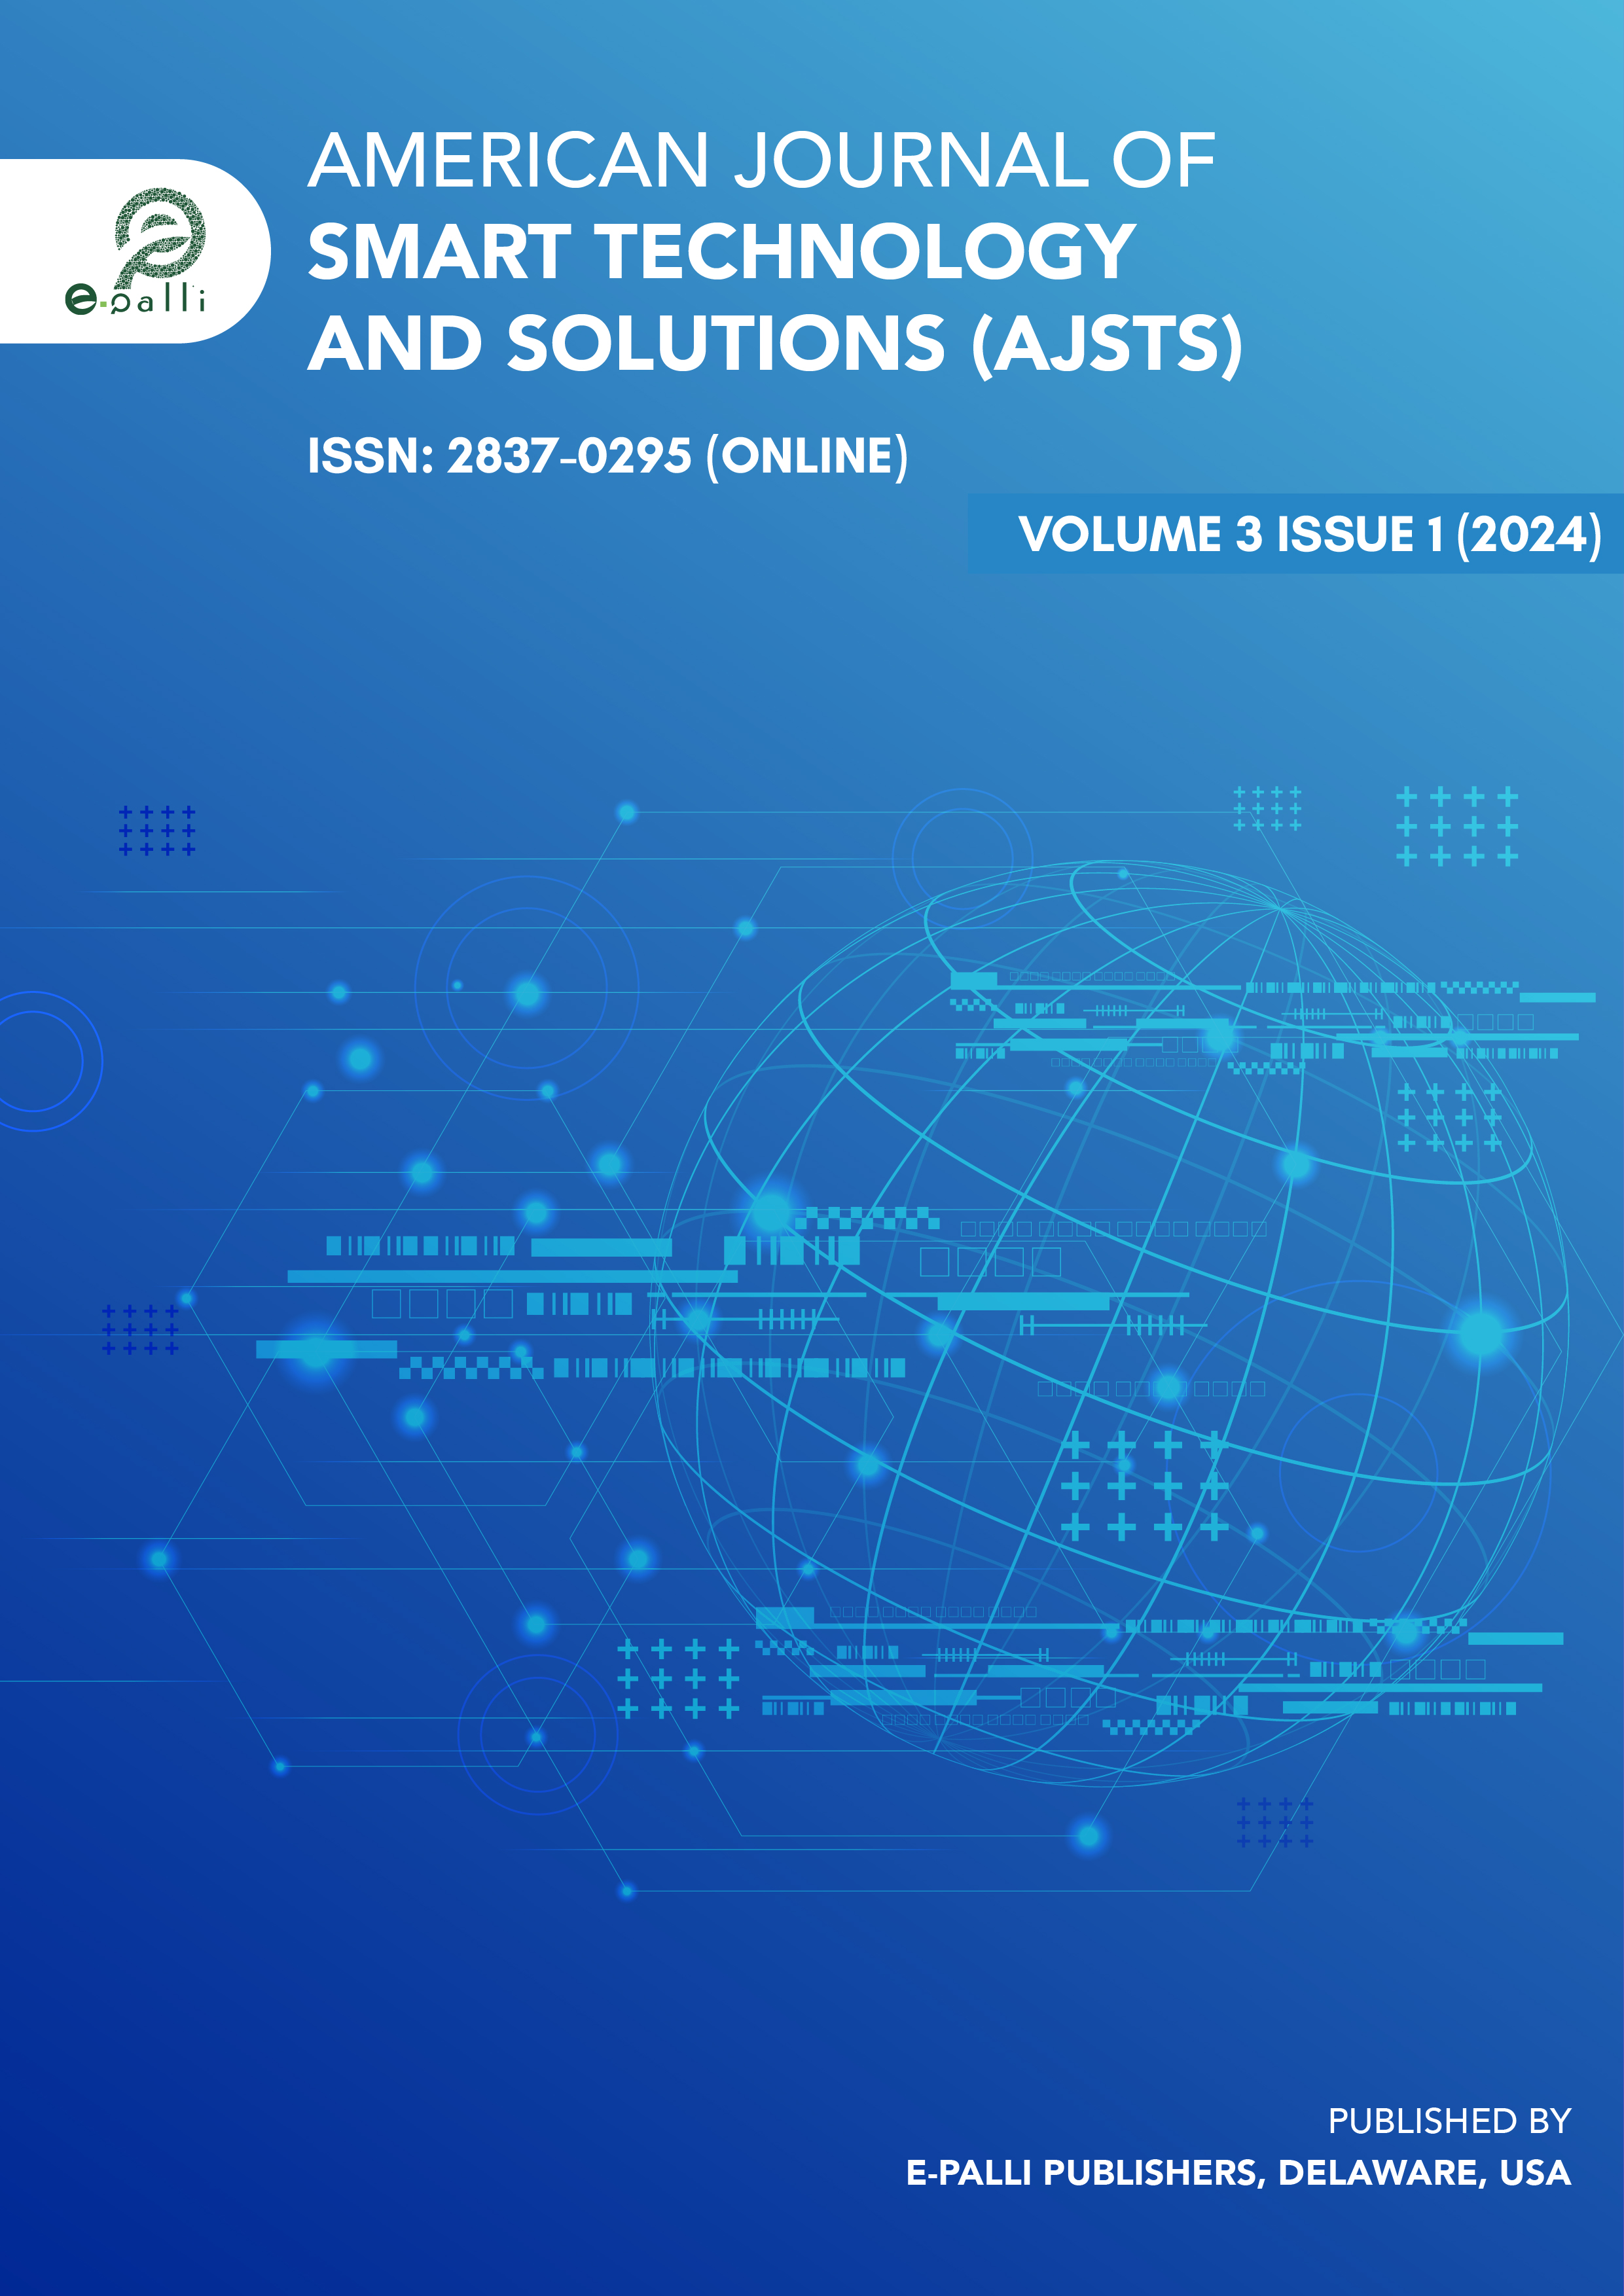                     View Vol. 3 No. 1 (2024): American Journal of Smart Technology and Solutions
                